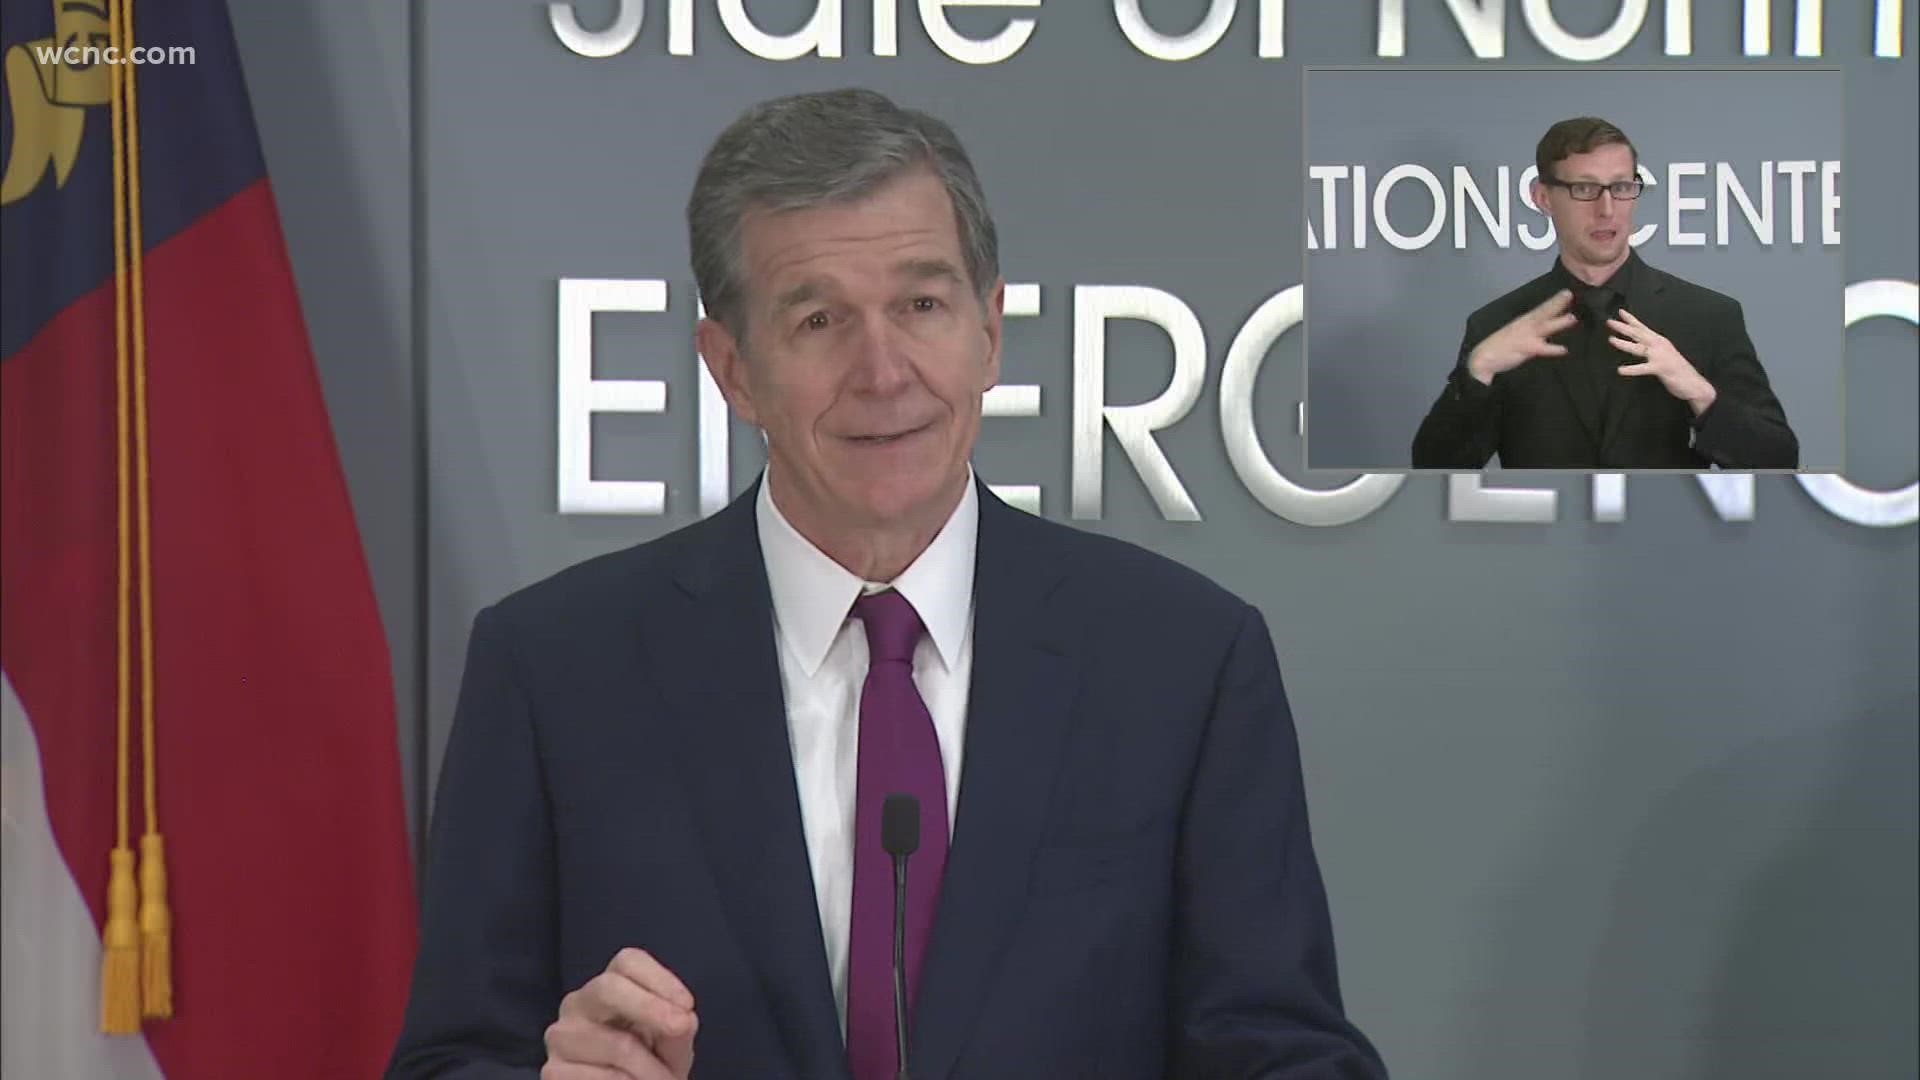 North Carolina Gov. Roy Cooper details record COVID-19 case numbers and vaccinations following the holiday season.